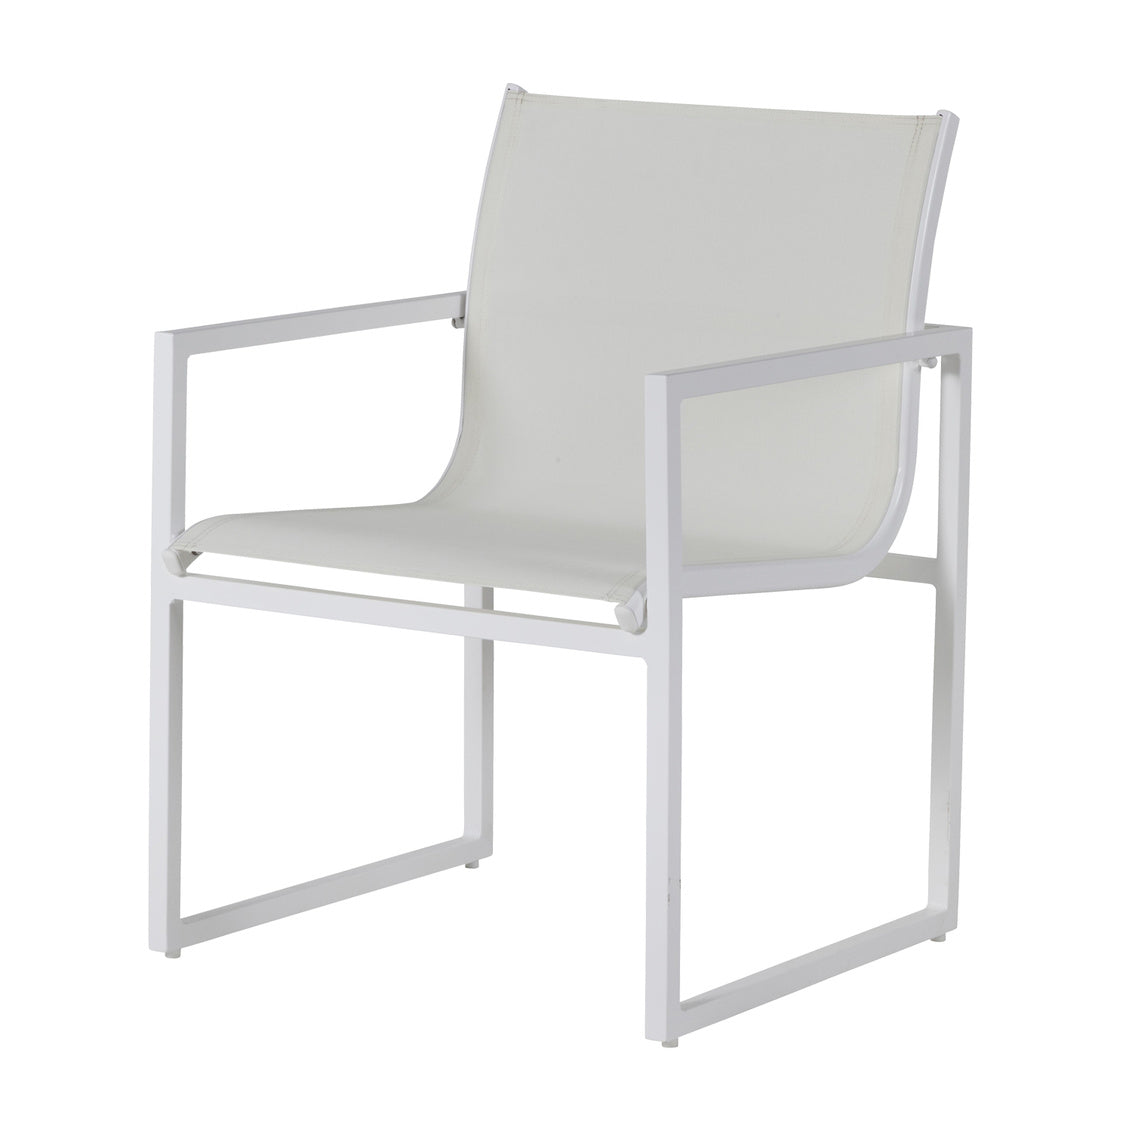 Serenata Sling Arm Chair Chalk With White Sling